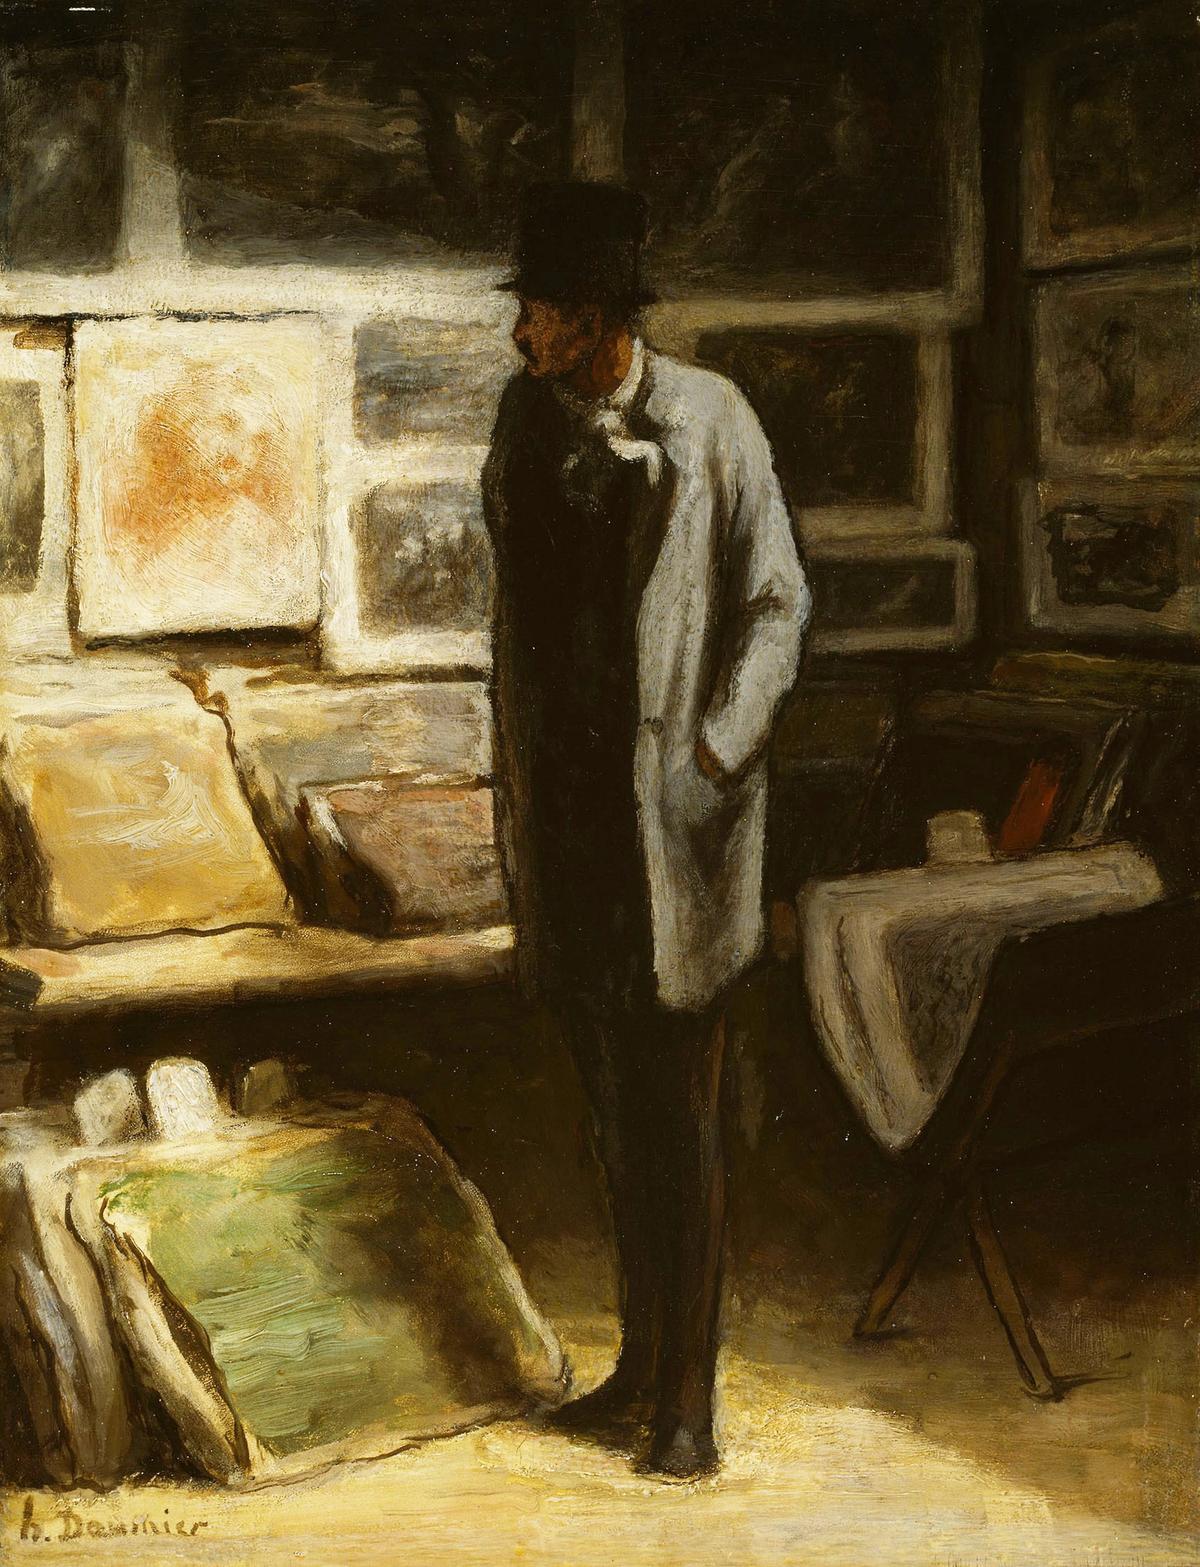 It is no longer as simple as collectors collecting art and museums bringing collectors into the fold, Felix Salmon says Honoré Daumier Victorin's The Print Collector (around 1852-68). Collection of Art institute of Chicago